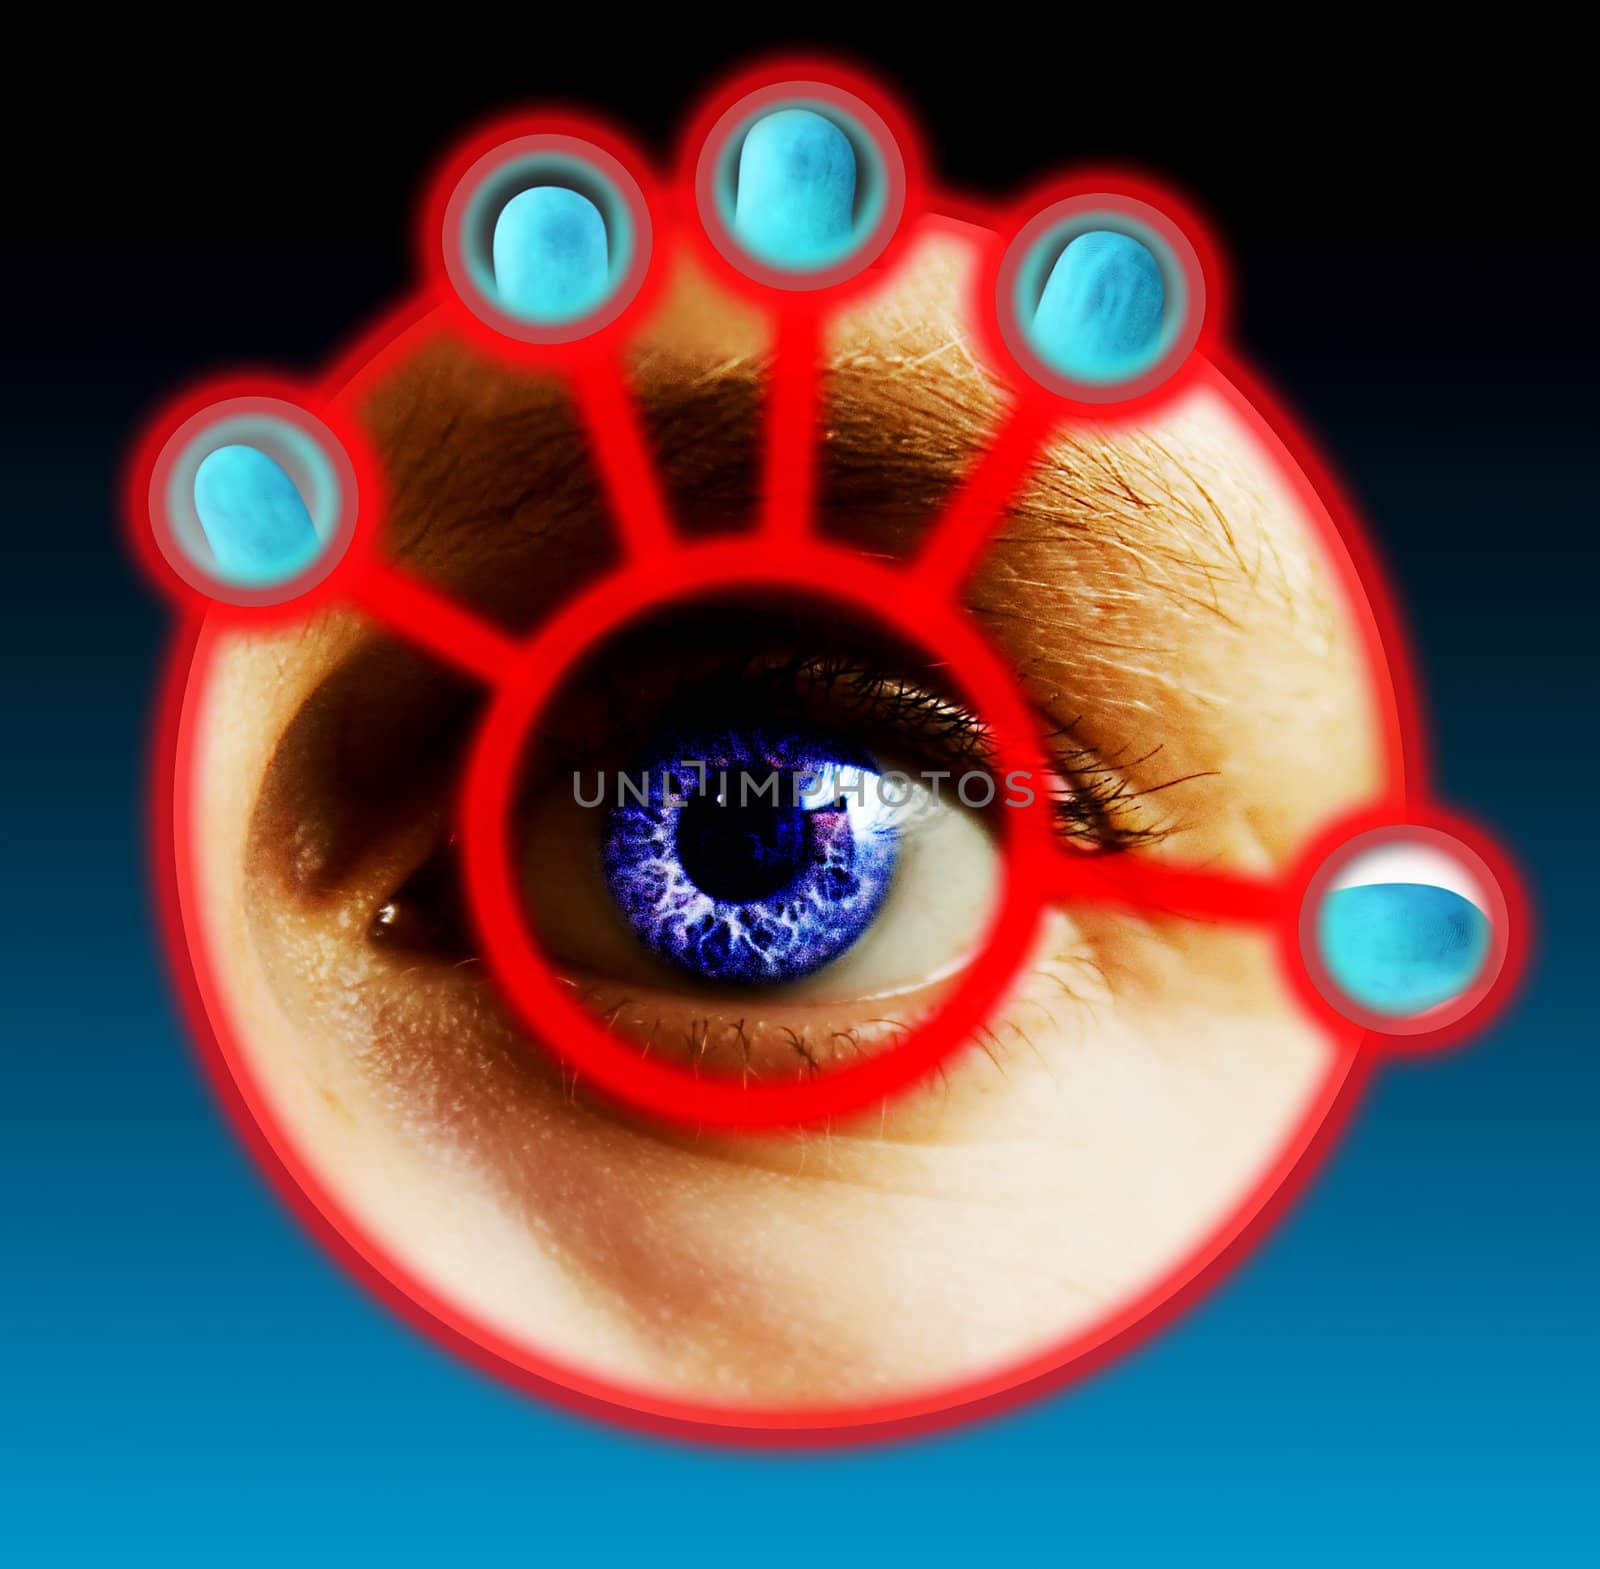 Fingers being scanned for their fingerprints and eye scan. Security concept image.